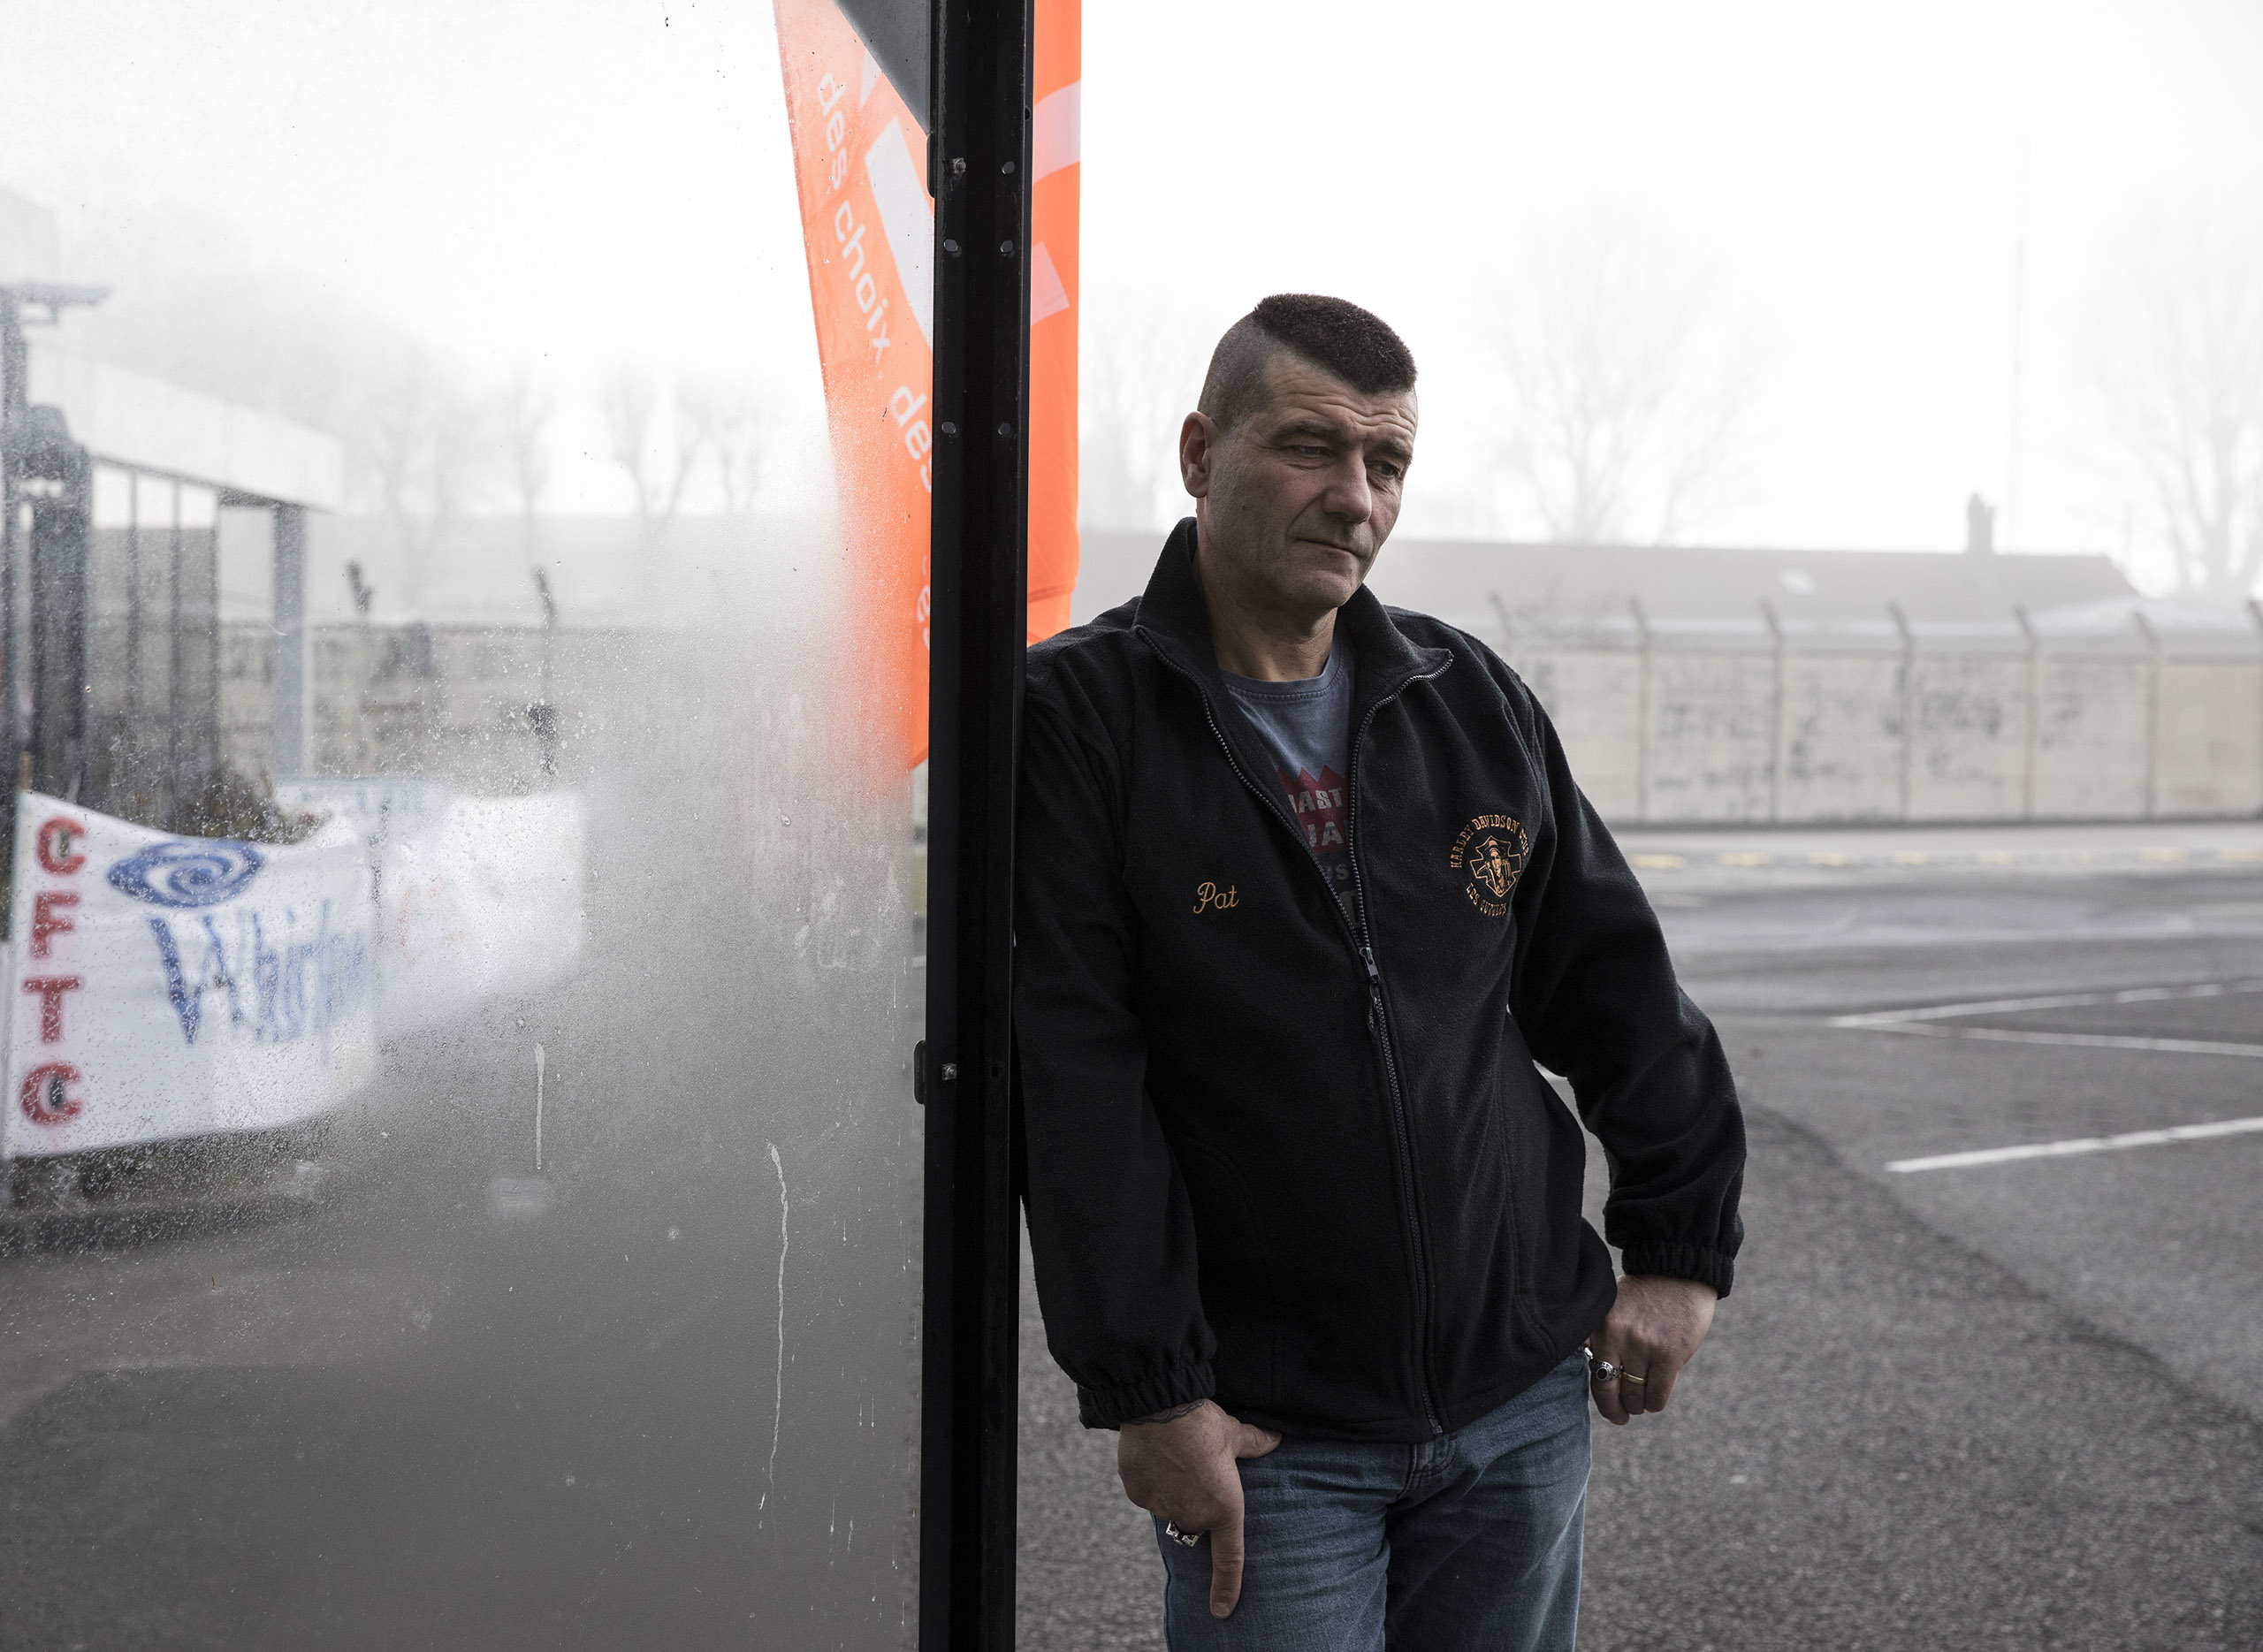 Patrice Sinoquet, 54, Whirlpool factory worker in Amiens. One of 300 people threatened with being laid off when Whirlpool moves production to Poland in 2018.  Since 2000 we workers have been thrown out like Kleenex,  he says, sitting in the reception area of the factory.  And since 2008 there have been no jobs. Here in France there is no work, no enterprises.